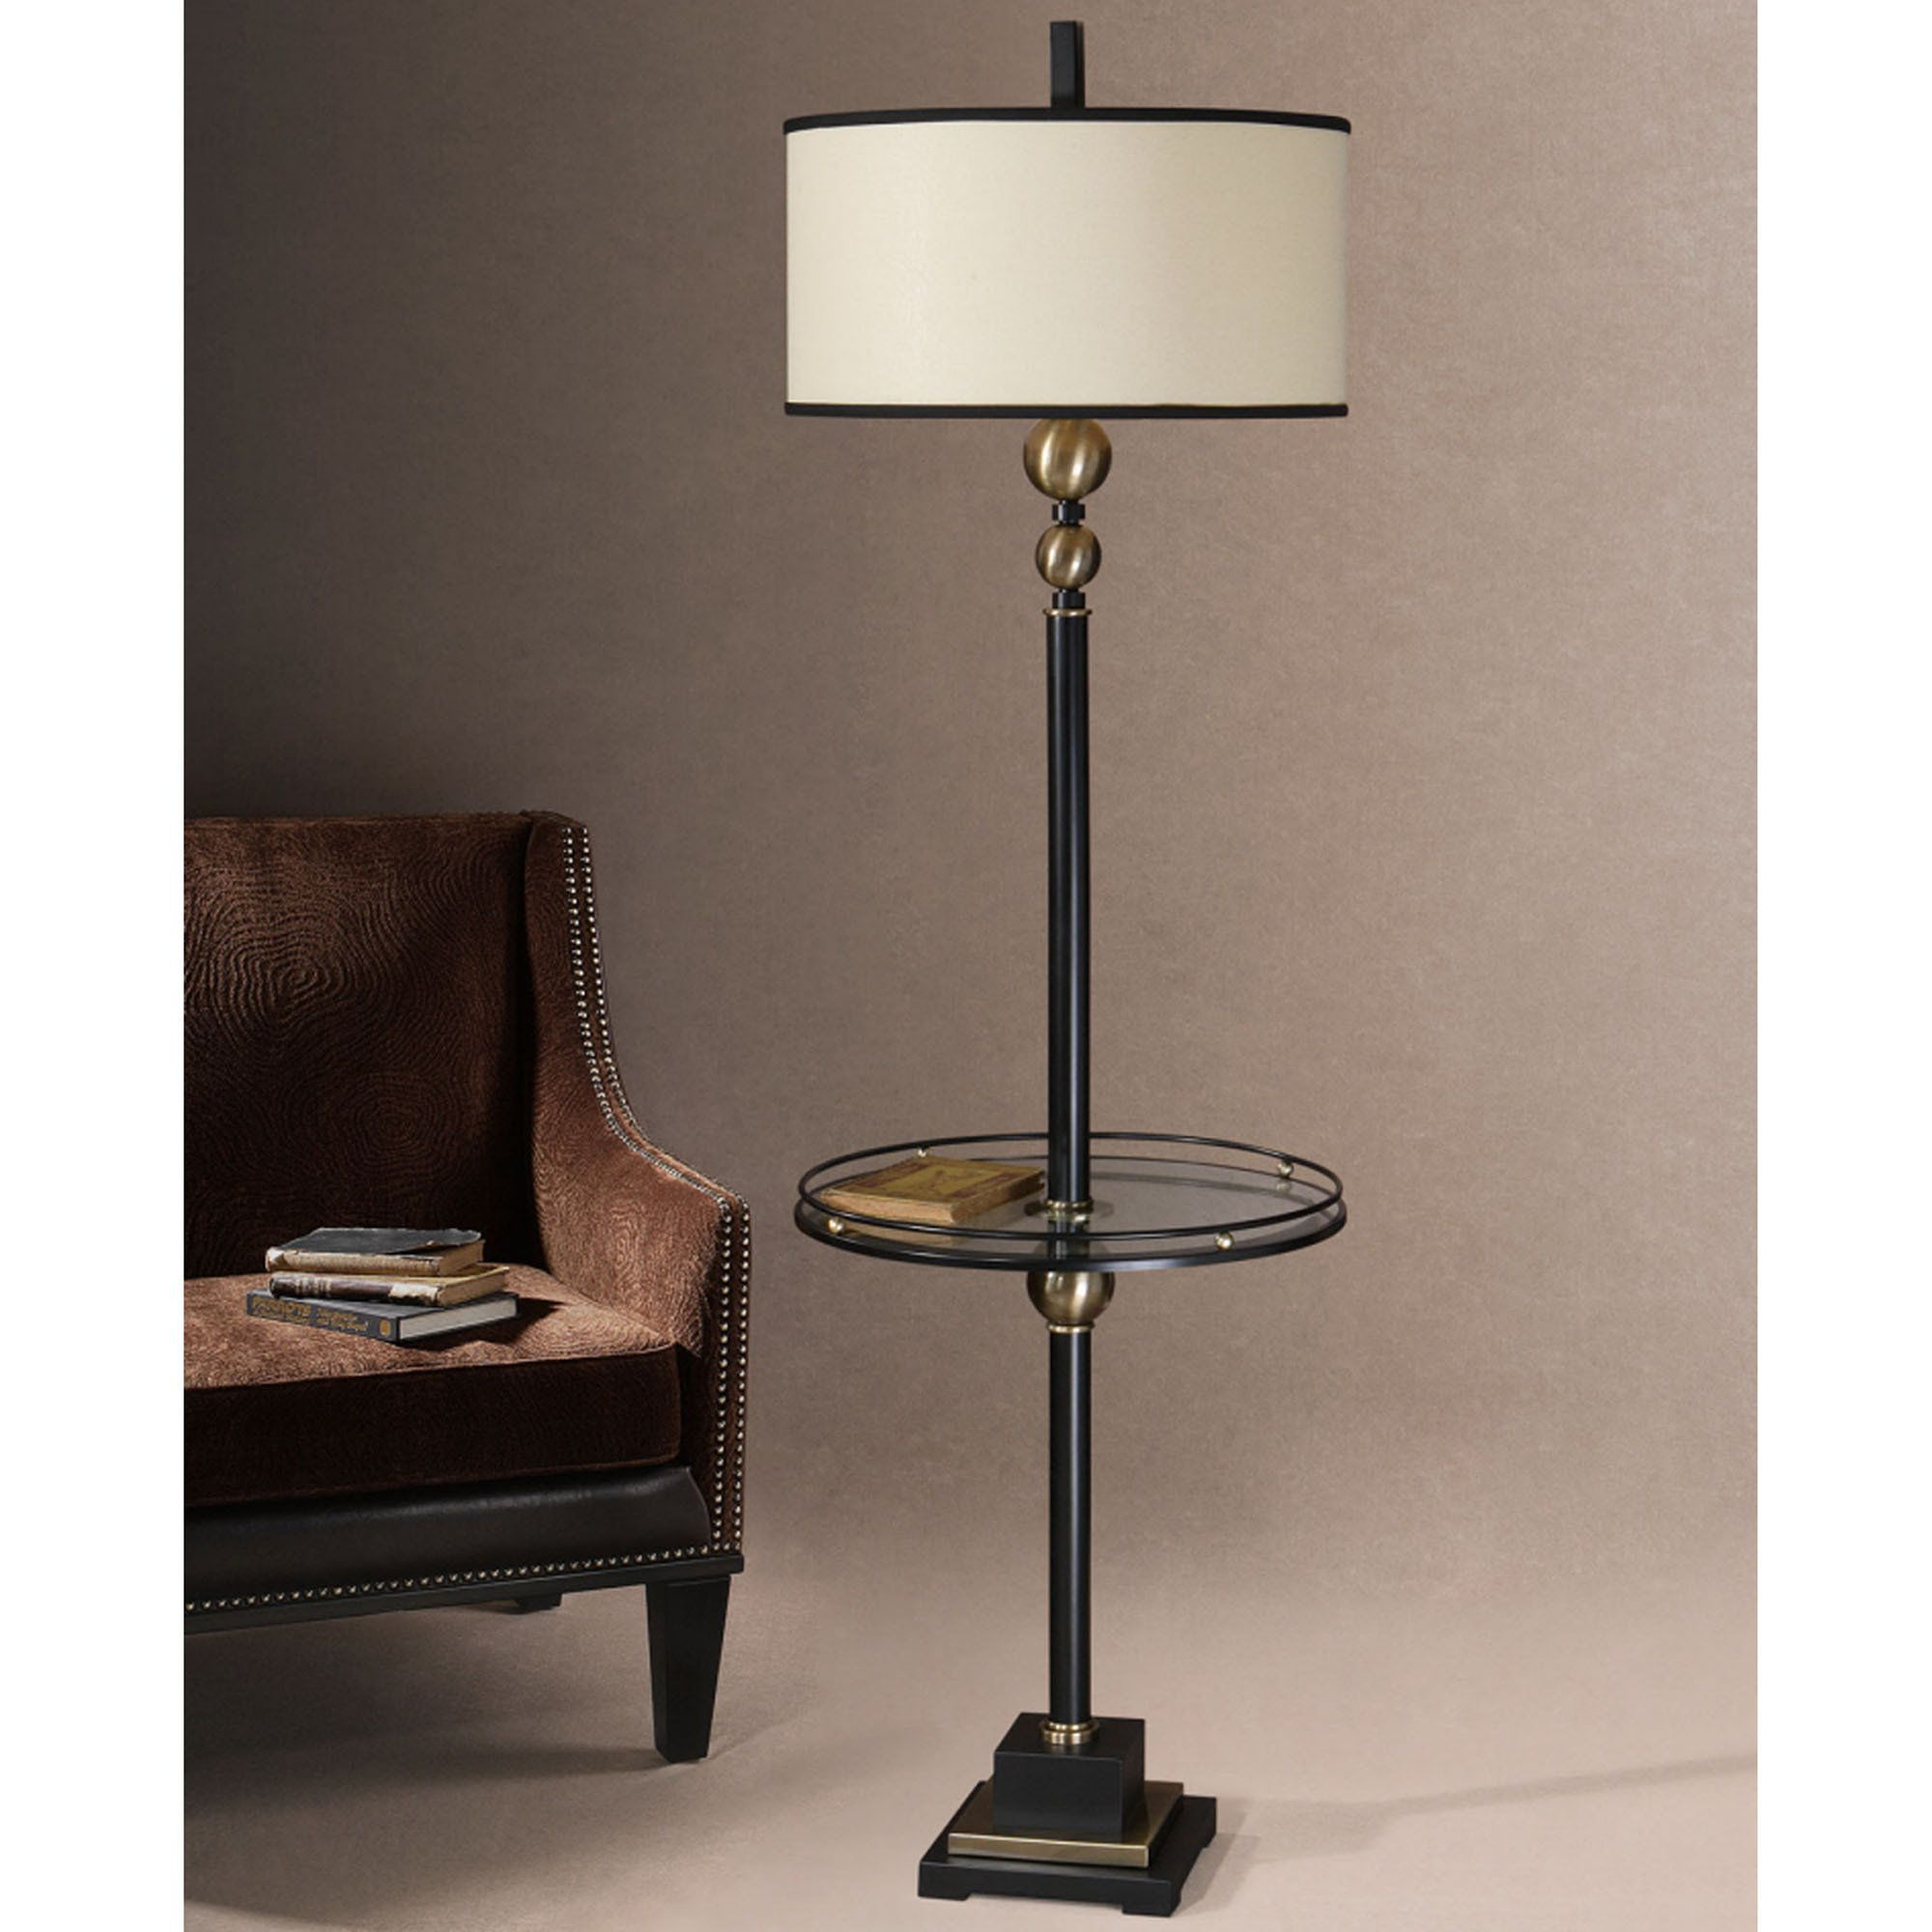 Joaquin Floor Lamp With Attached Glass Table Let There Be regarding measurements 2000 X 2000